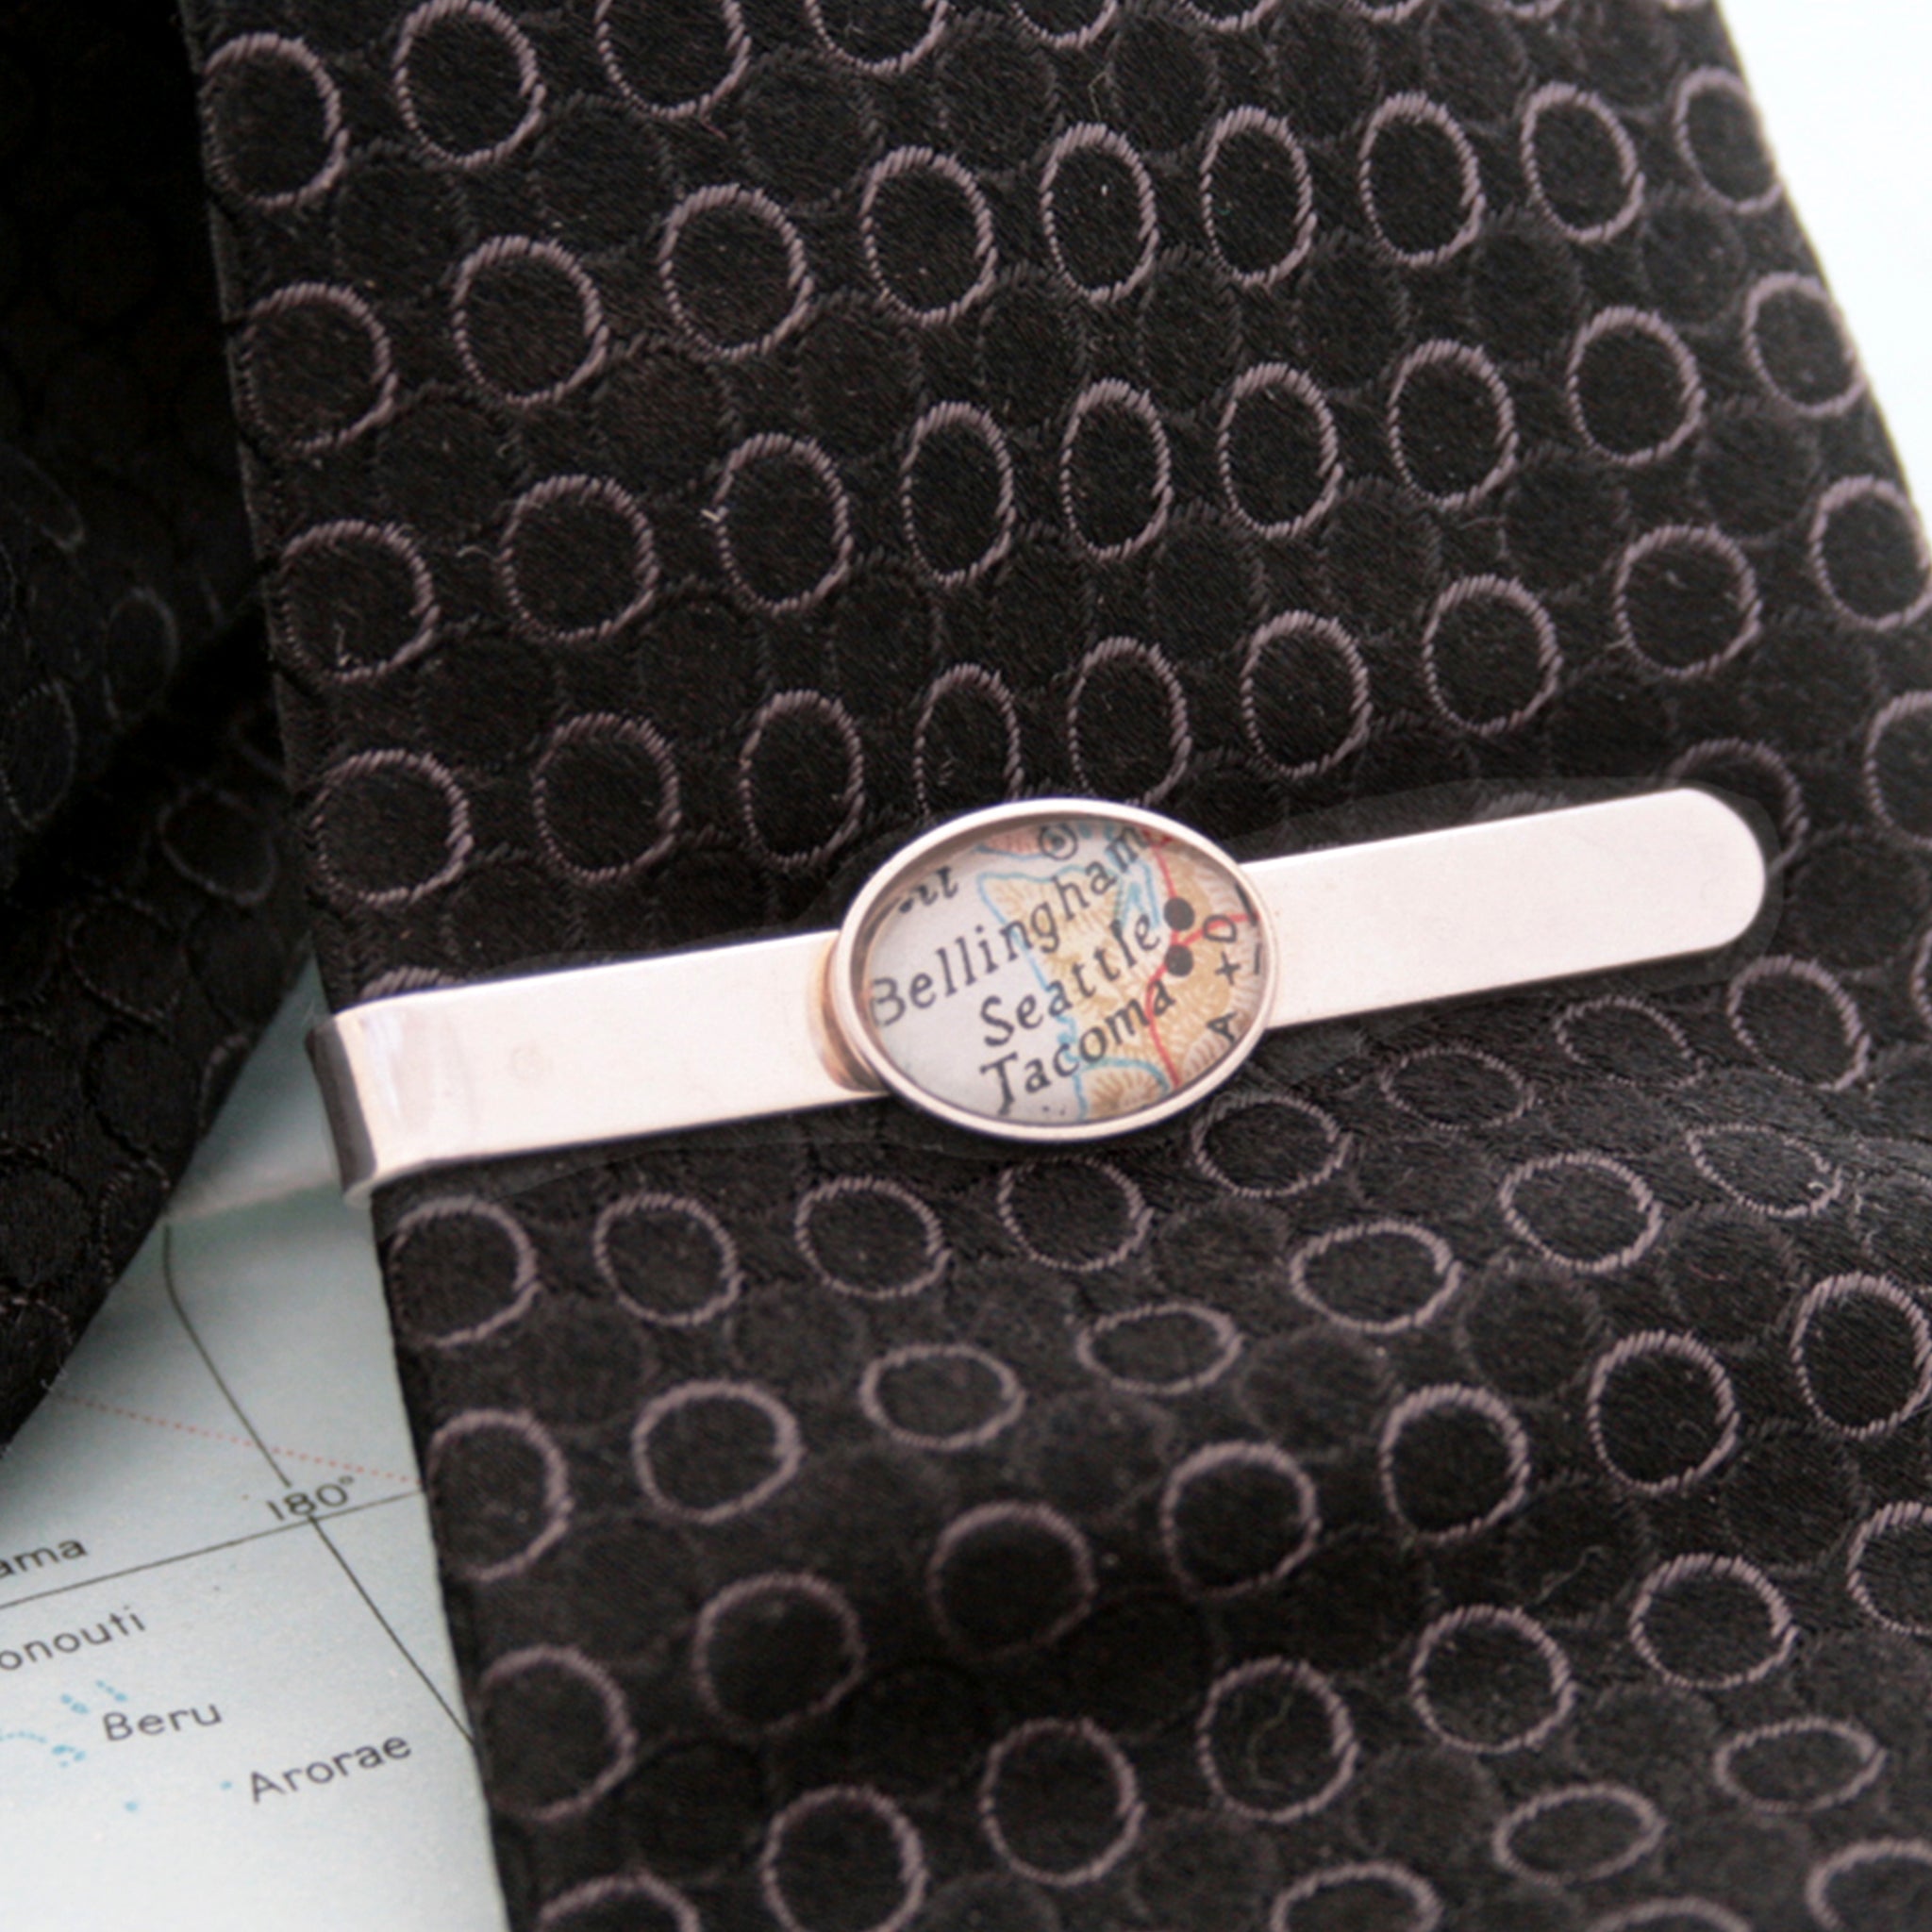  Sterling Silver tie clip that features custom map location on a black tie